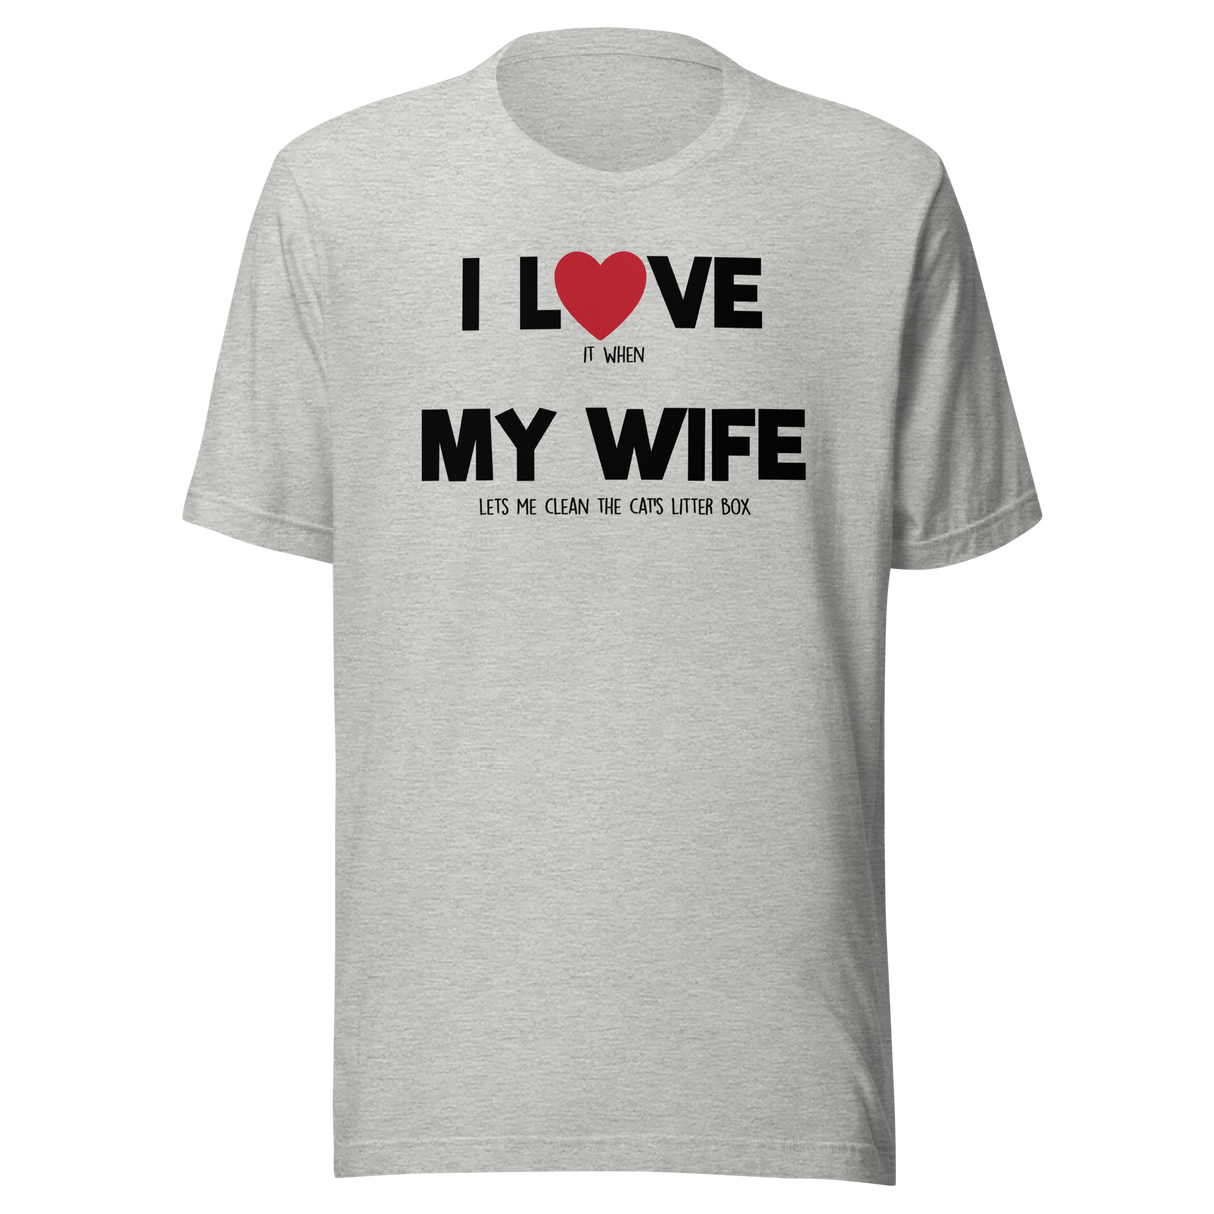 i-love-it-when-my-wife-lets-me-clean-the-cats-litter-box-i-love-my-wife-wife-tee-life-t-shirt-funny-tee-novelty-t-shirt-humorous-tee#color_athletic-heather